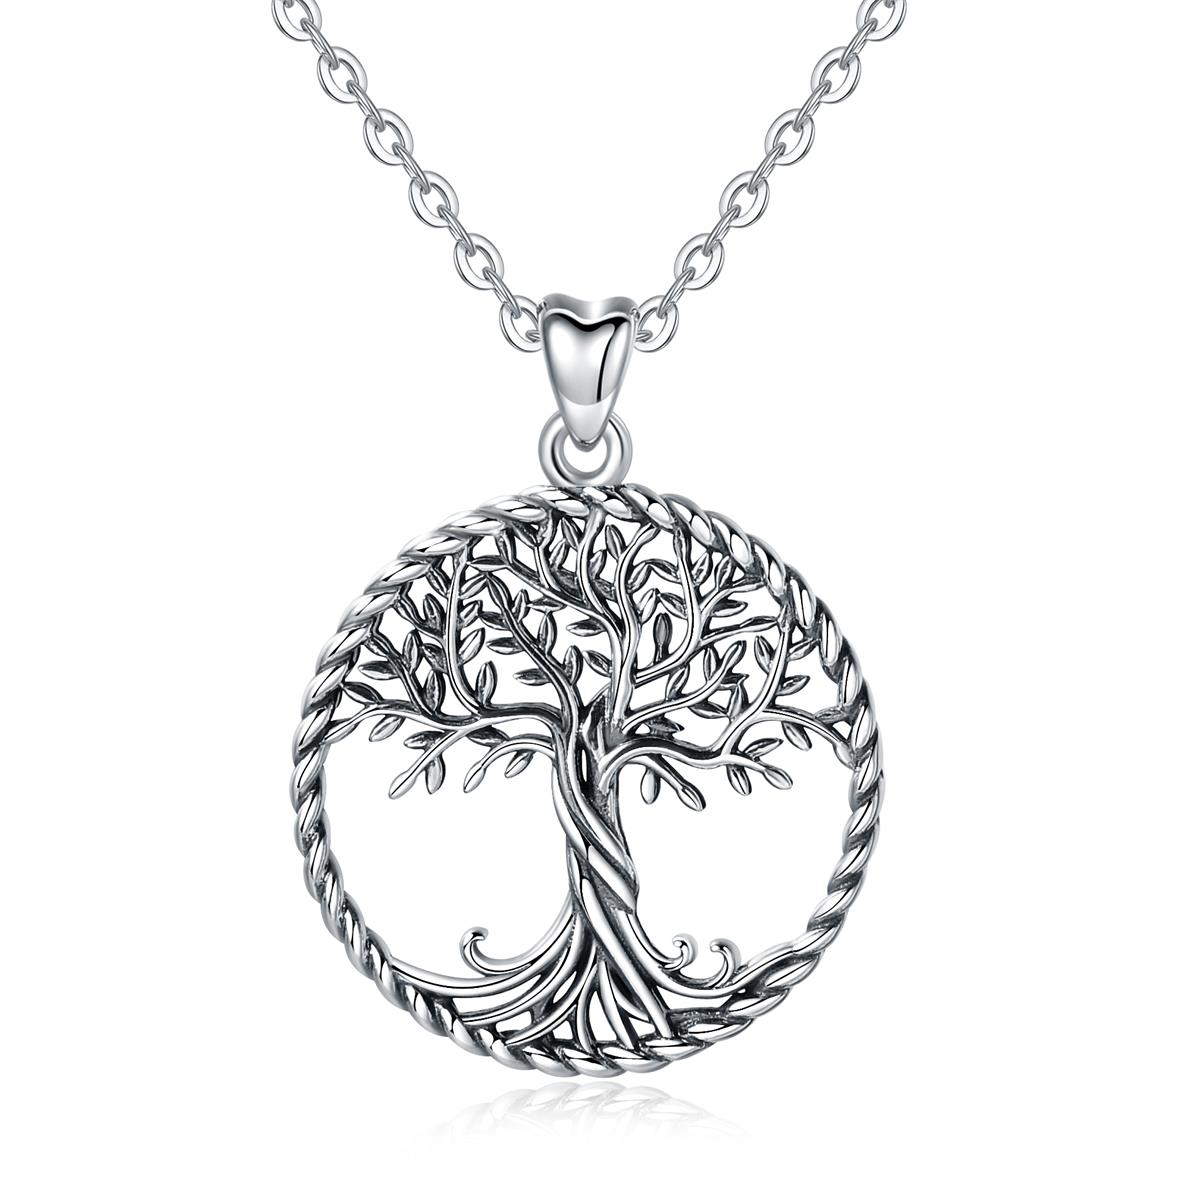 Merryshine Jewelry S925 Sterling Silver Round Shape Tree of Life Necklace Family Tree Circle Pendant